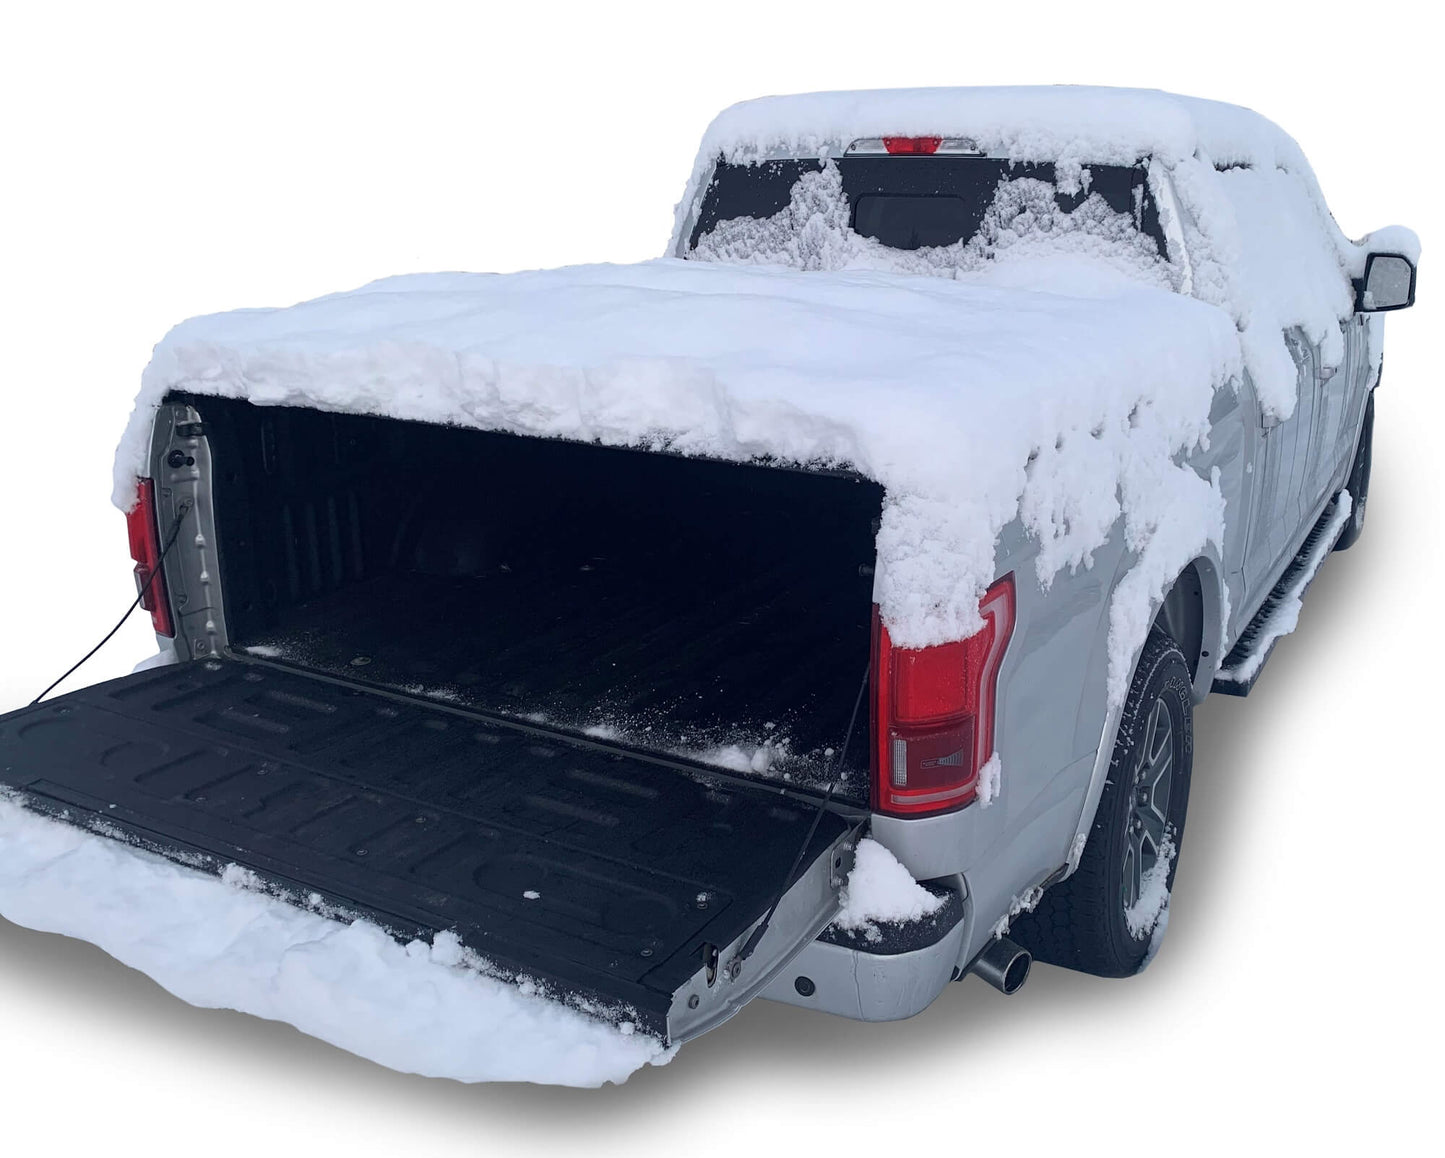 Silver Ford F-150 with Sawtooth Stretch truck bed cover laying flat covered in snow